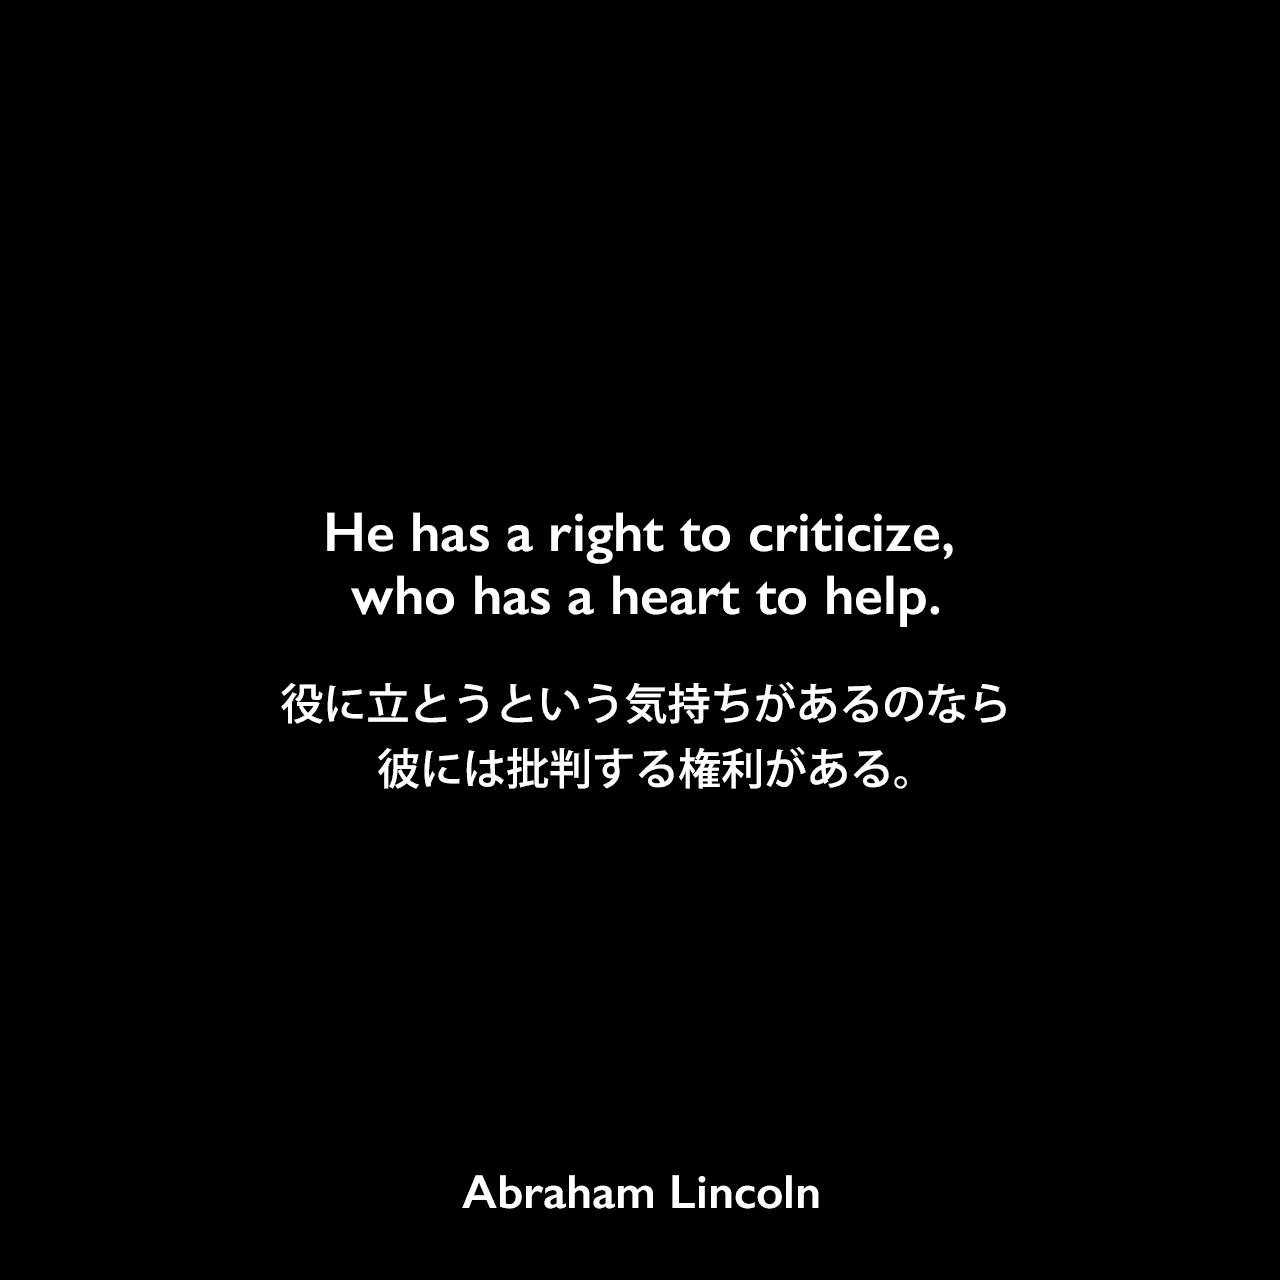 He has a right to criticize, who has a heart to help.役に立とうという気持ちがあるのなら、彼には批判する権利がある。Abraham Lincoln